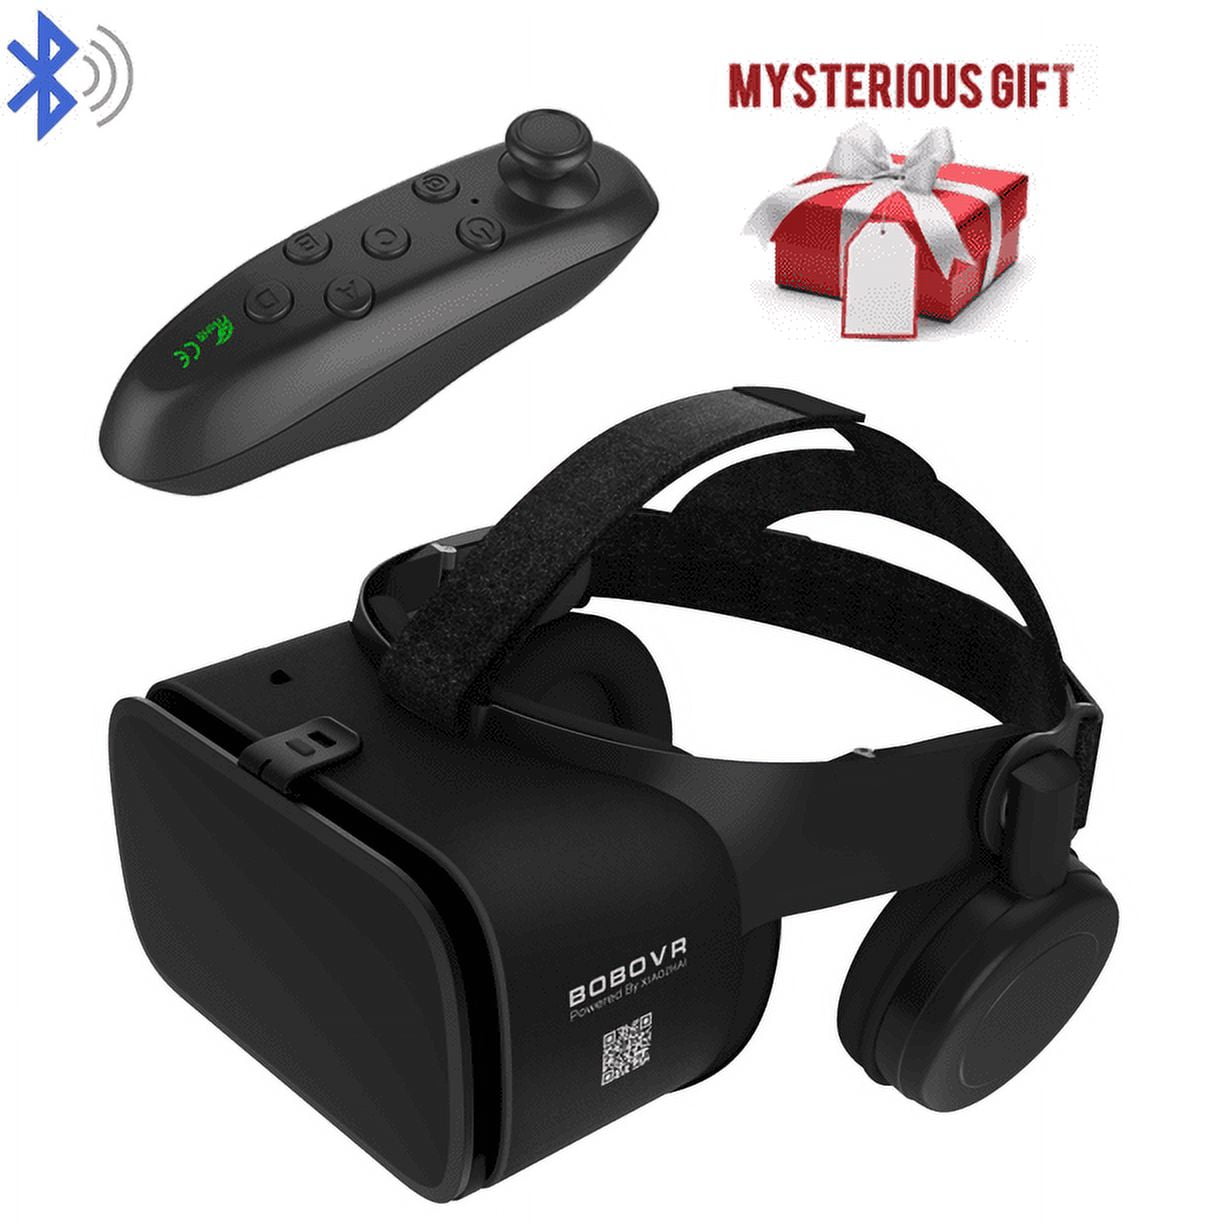 2023 Virtual Reality 3D VR Headset Smart Glasses, with Wireless